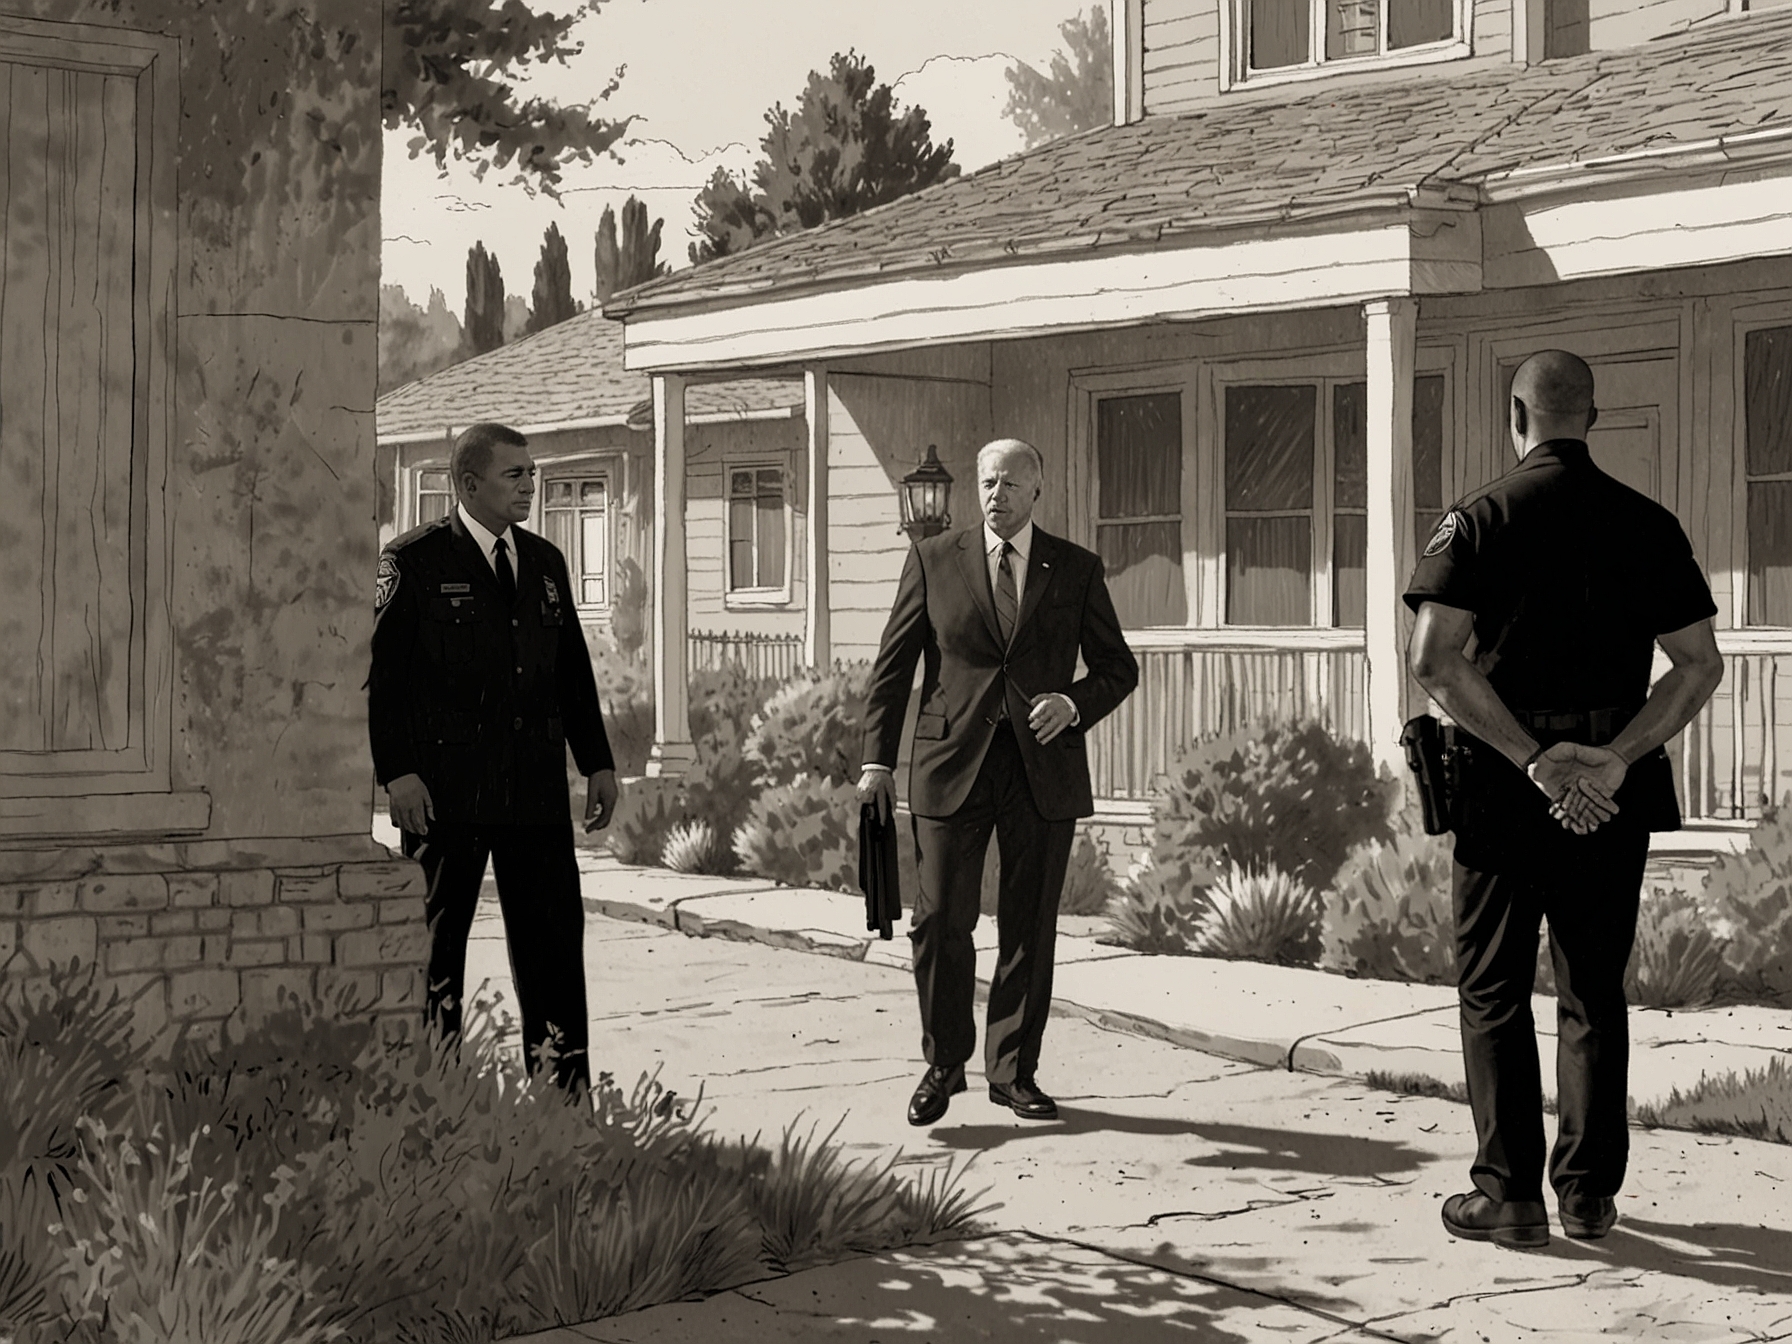 An illustration showing a Secret Service agent being approached by armed robbery suspects in a quiet neighborhood during President Biden’s California visit.